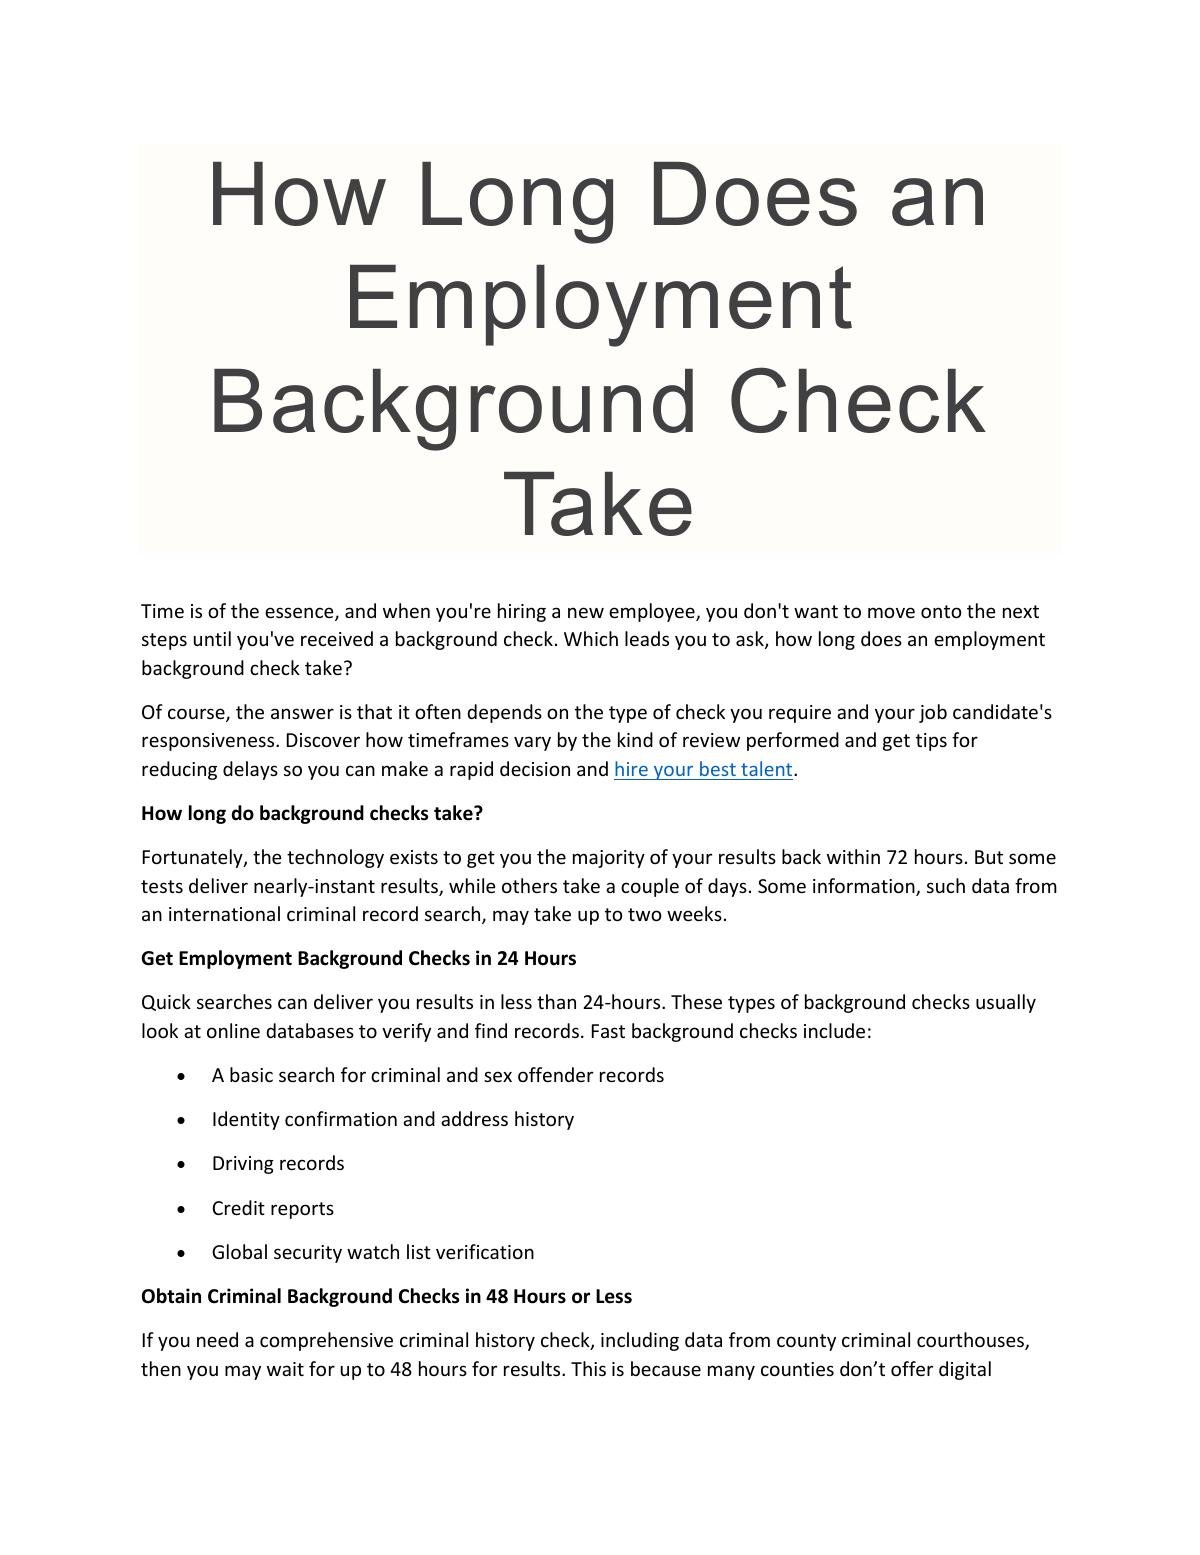 How Long Does an Employment Background Check Take